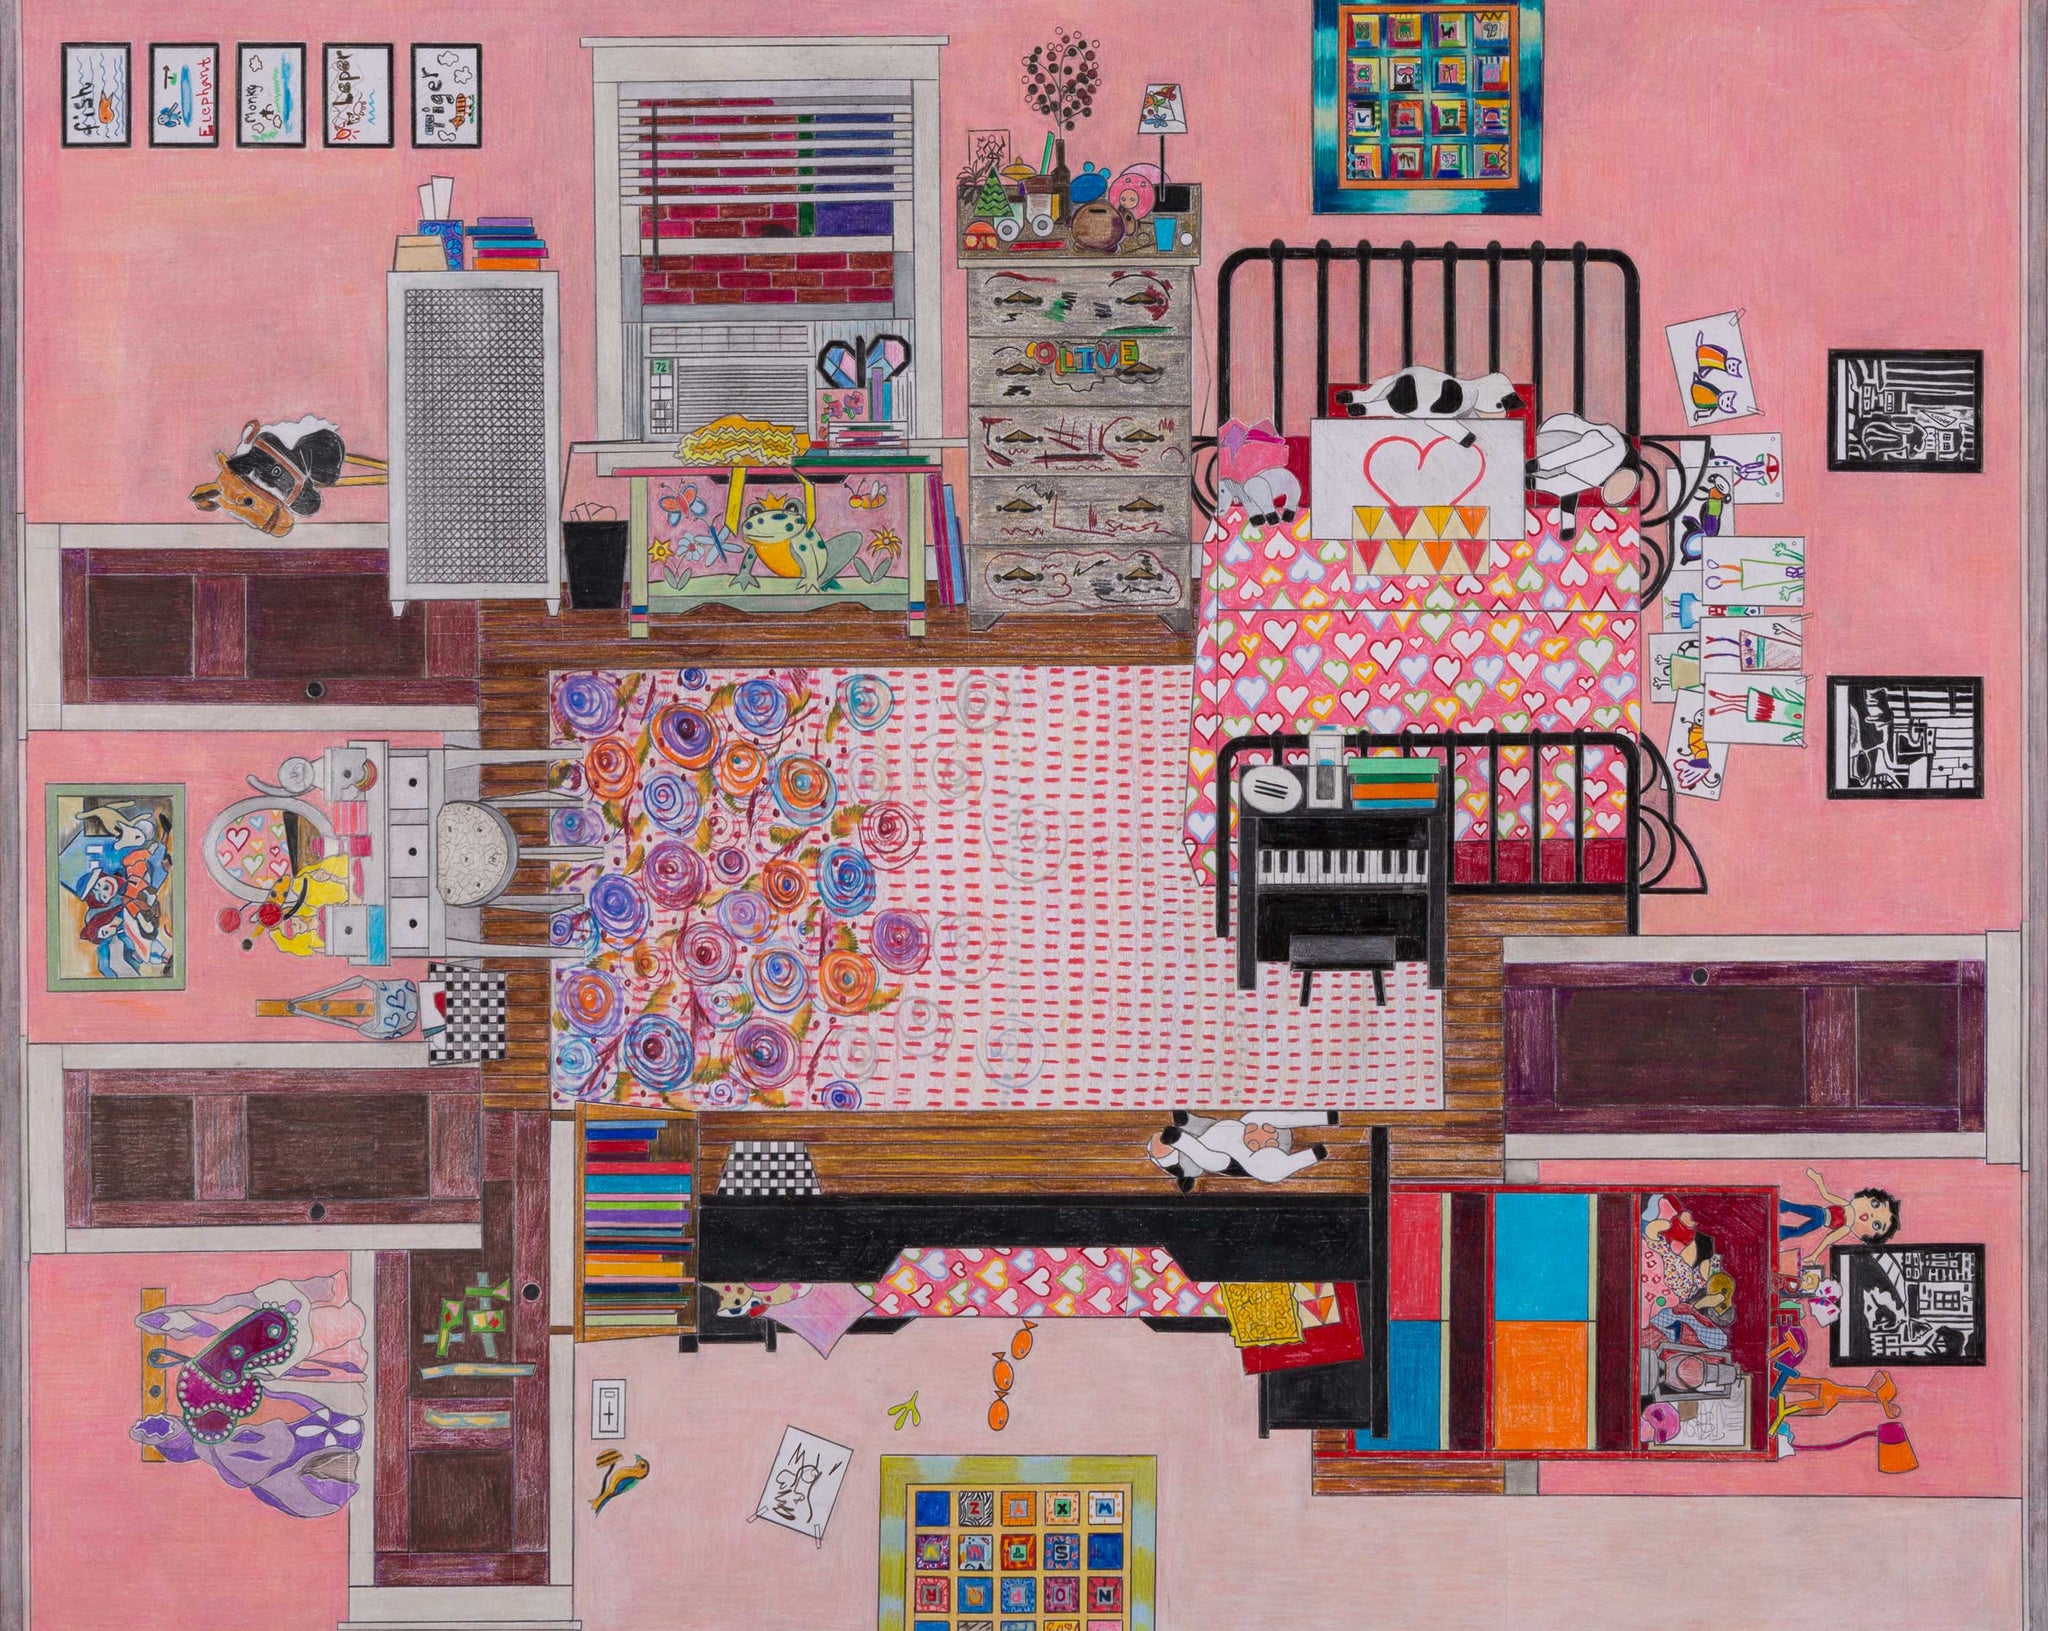 The Girl's Room, 2020